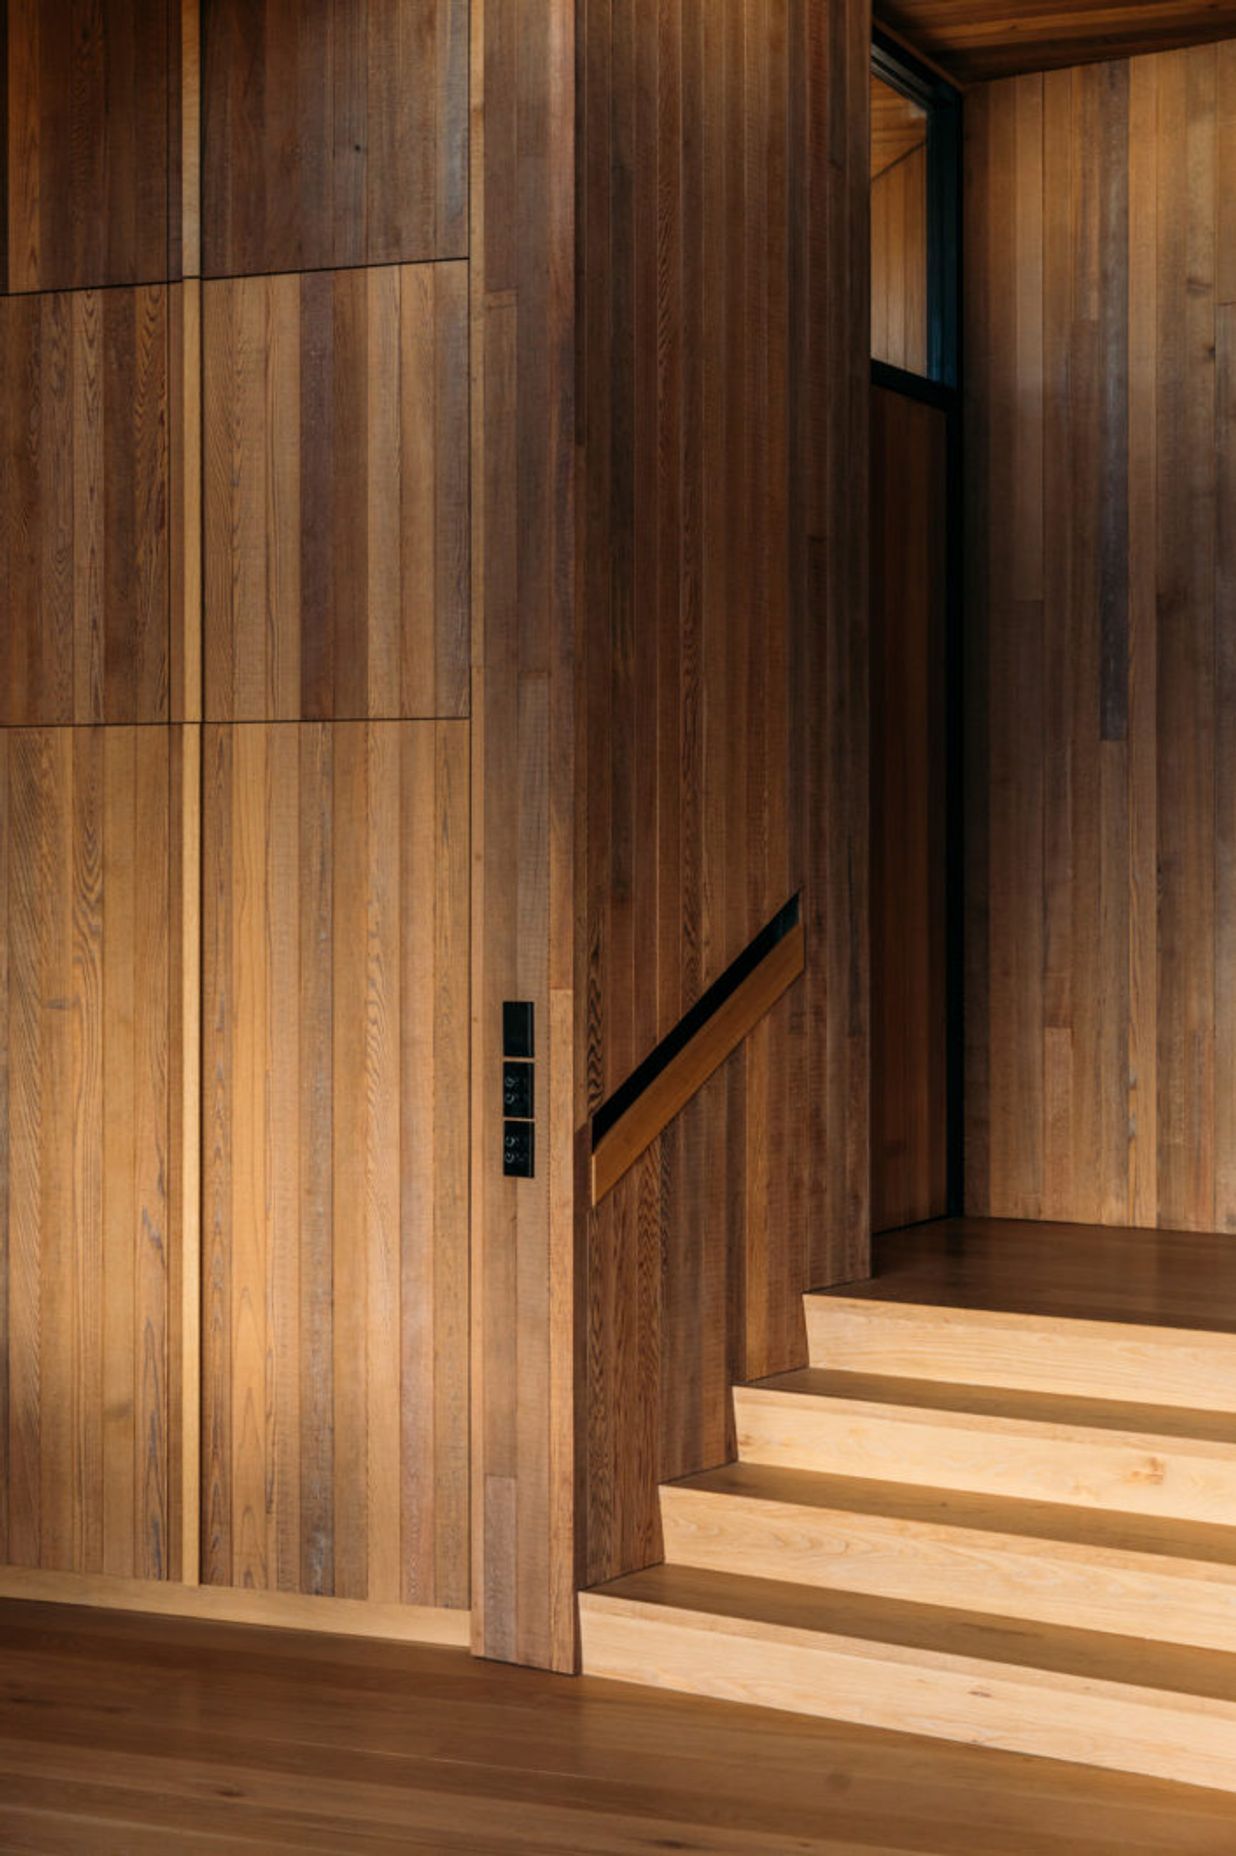 Rather than rely on colour and artworks, the architect has let the natural grain of the cedar provide visual interest.